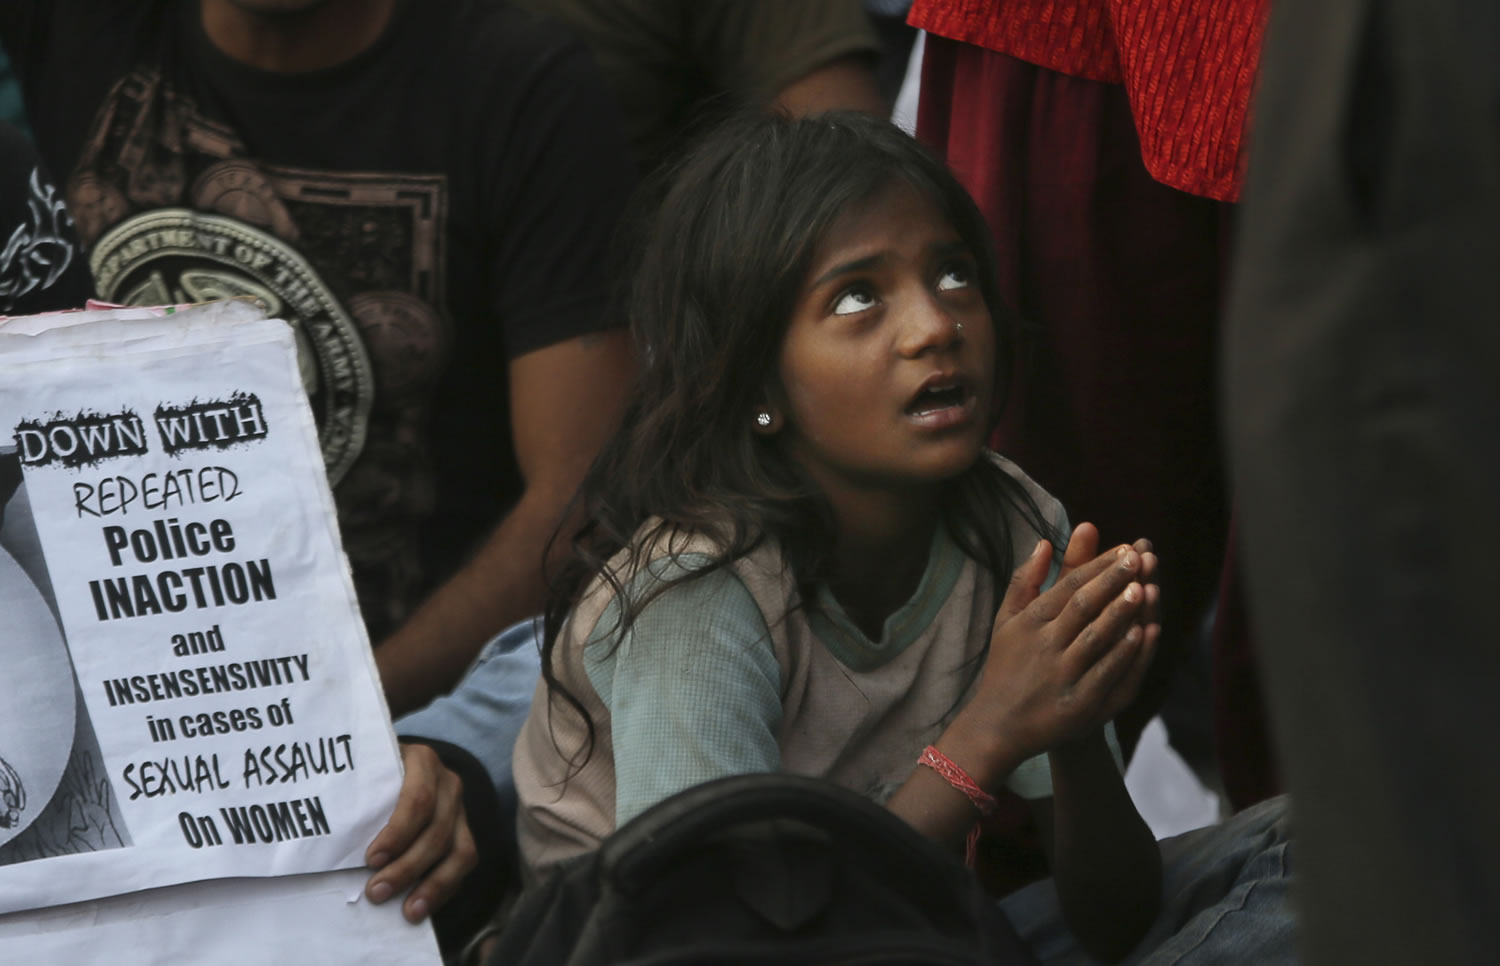 An Indian girl gestures Sunday as she joins protests near the India Gate monument in New Delhi, India, against the handling of a case involving the rape of a 5-year-old girl.